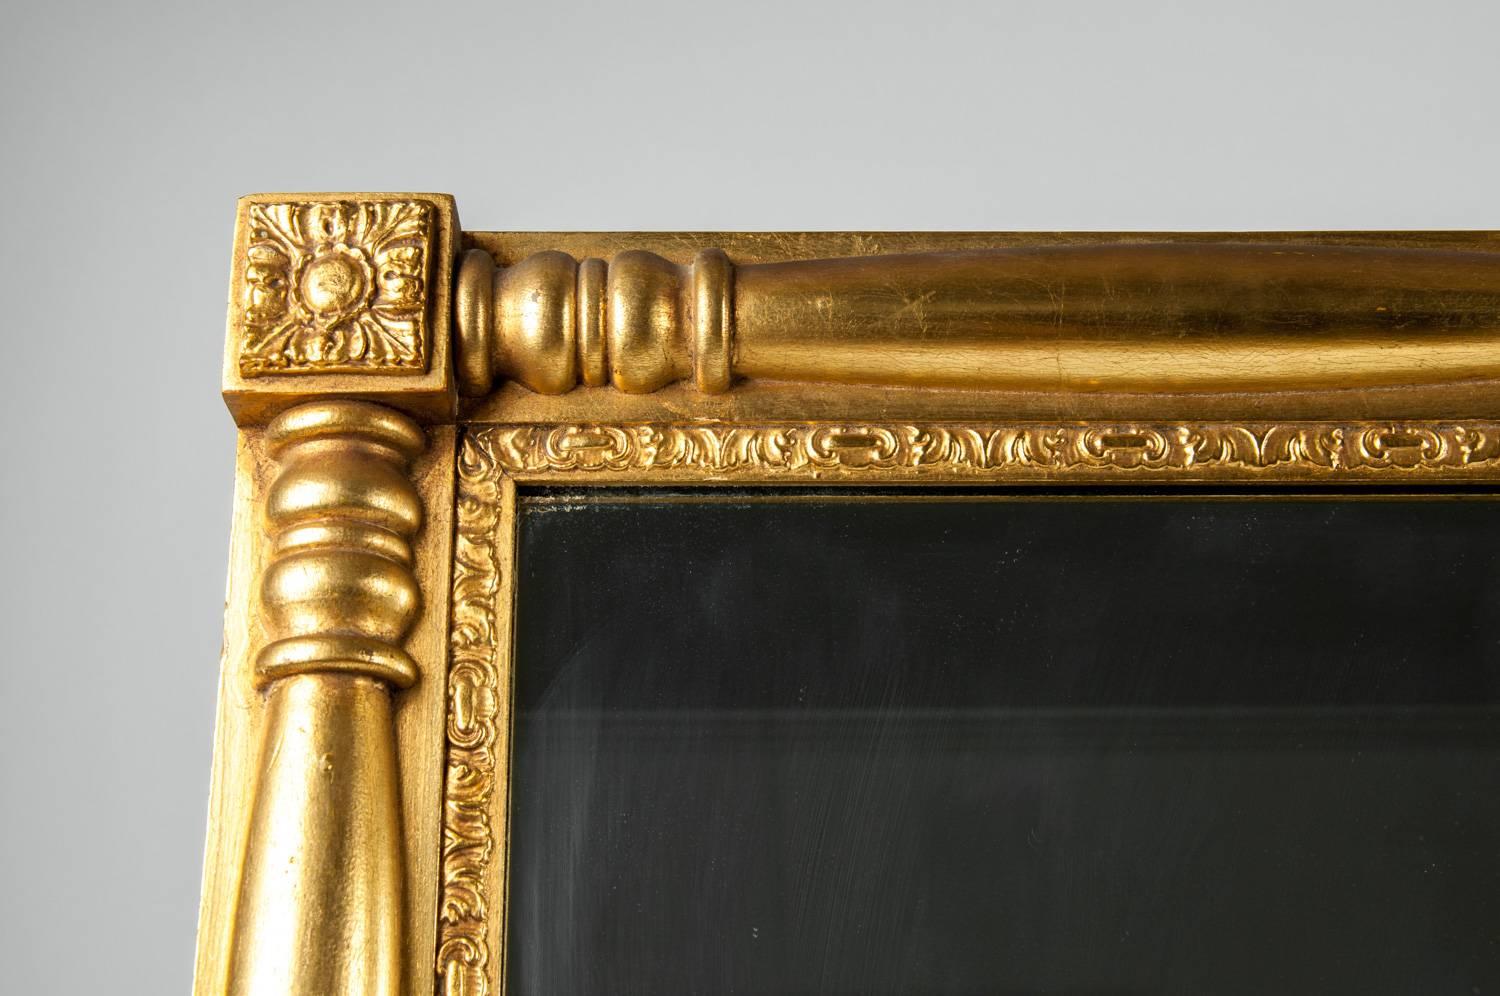 Vintage European gilded wood framed mantel or fireplace hanging wall mirror. The mirror is in excellent vintage condition with some minor wear consistent to use / age. The mirror measure about 45 inches x 35 inches x 2 inches.